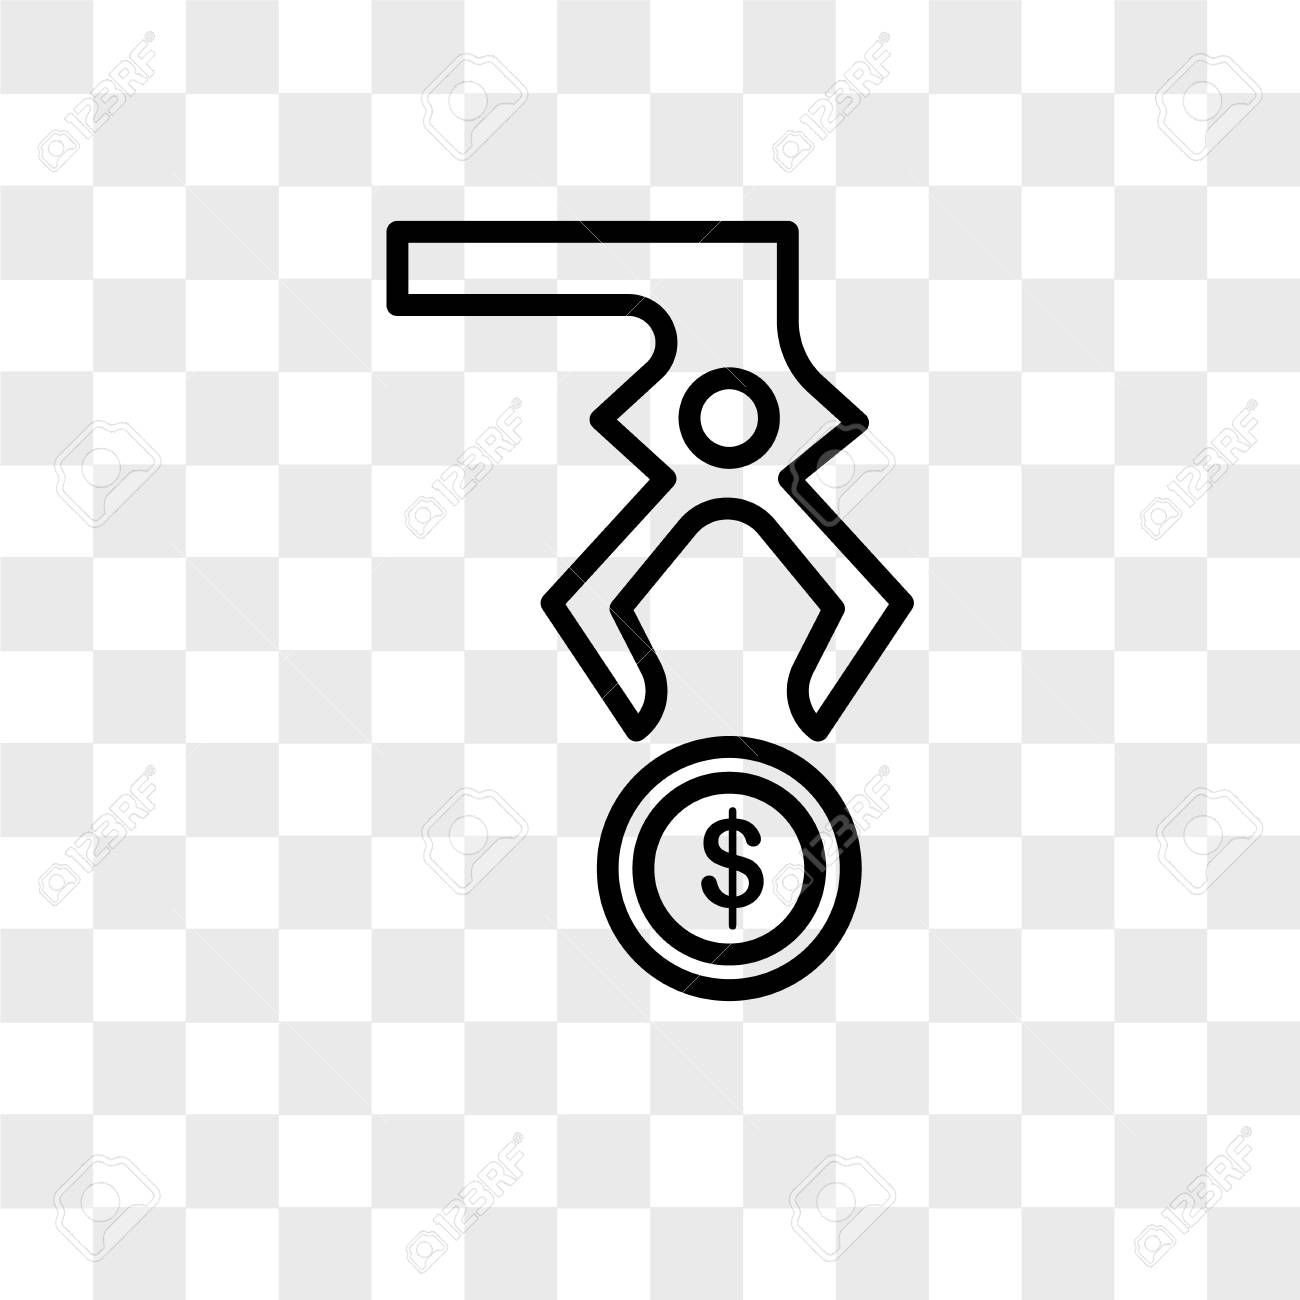 Steal Vector Icon Isolated On Transparent Background Logo